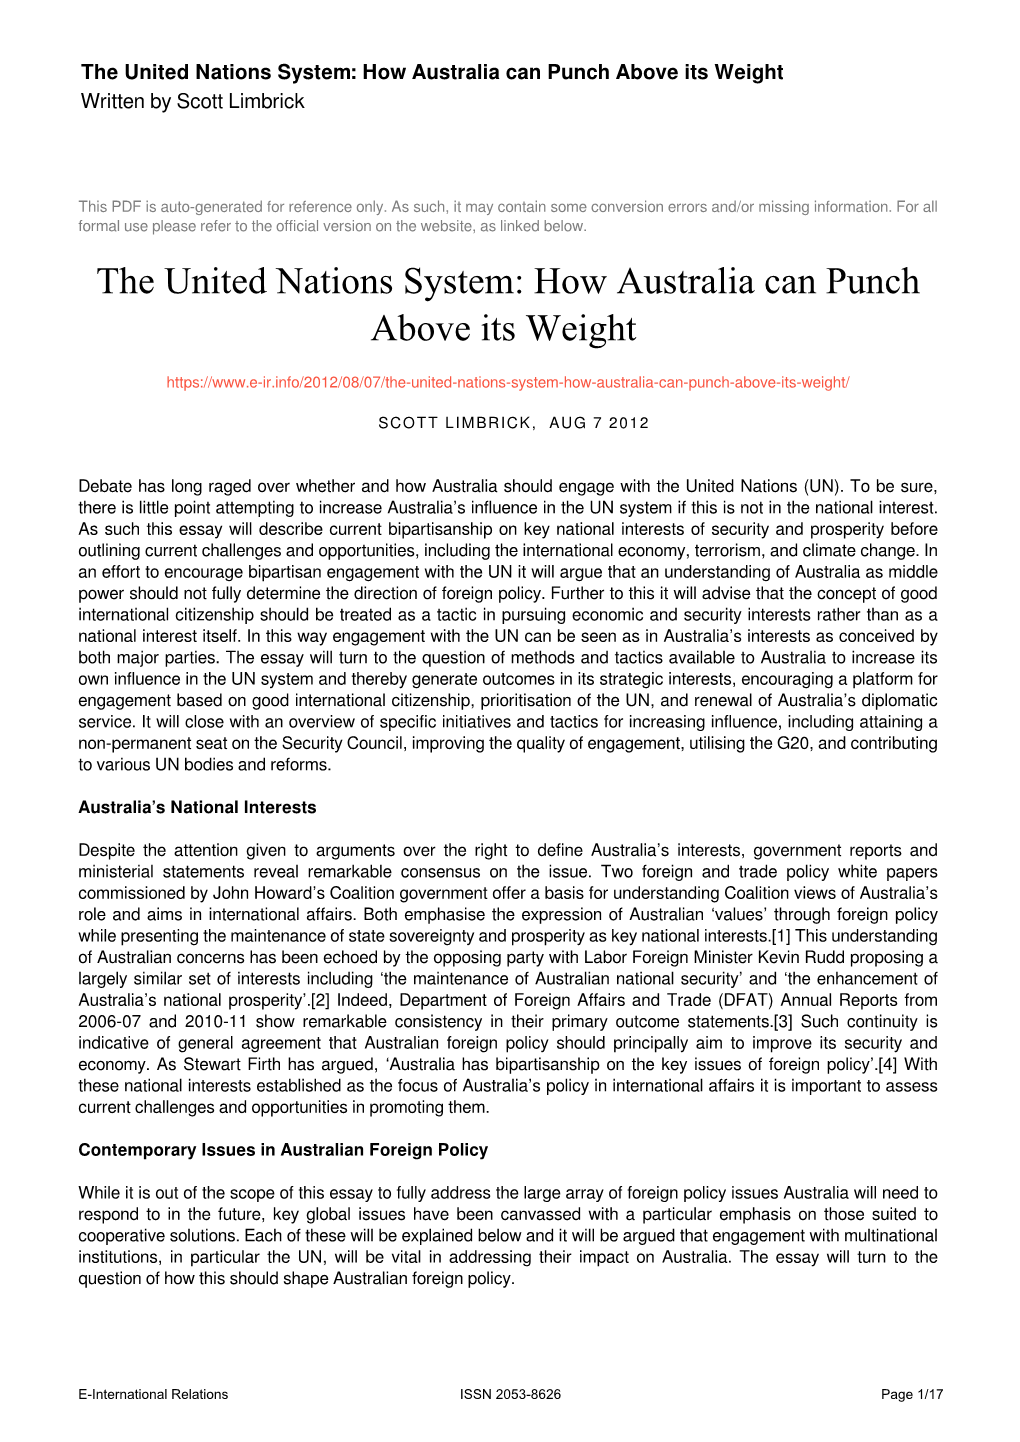 The United Nations System: How Australia Can Punch Above Its Weight Written by Scott Limbrick